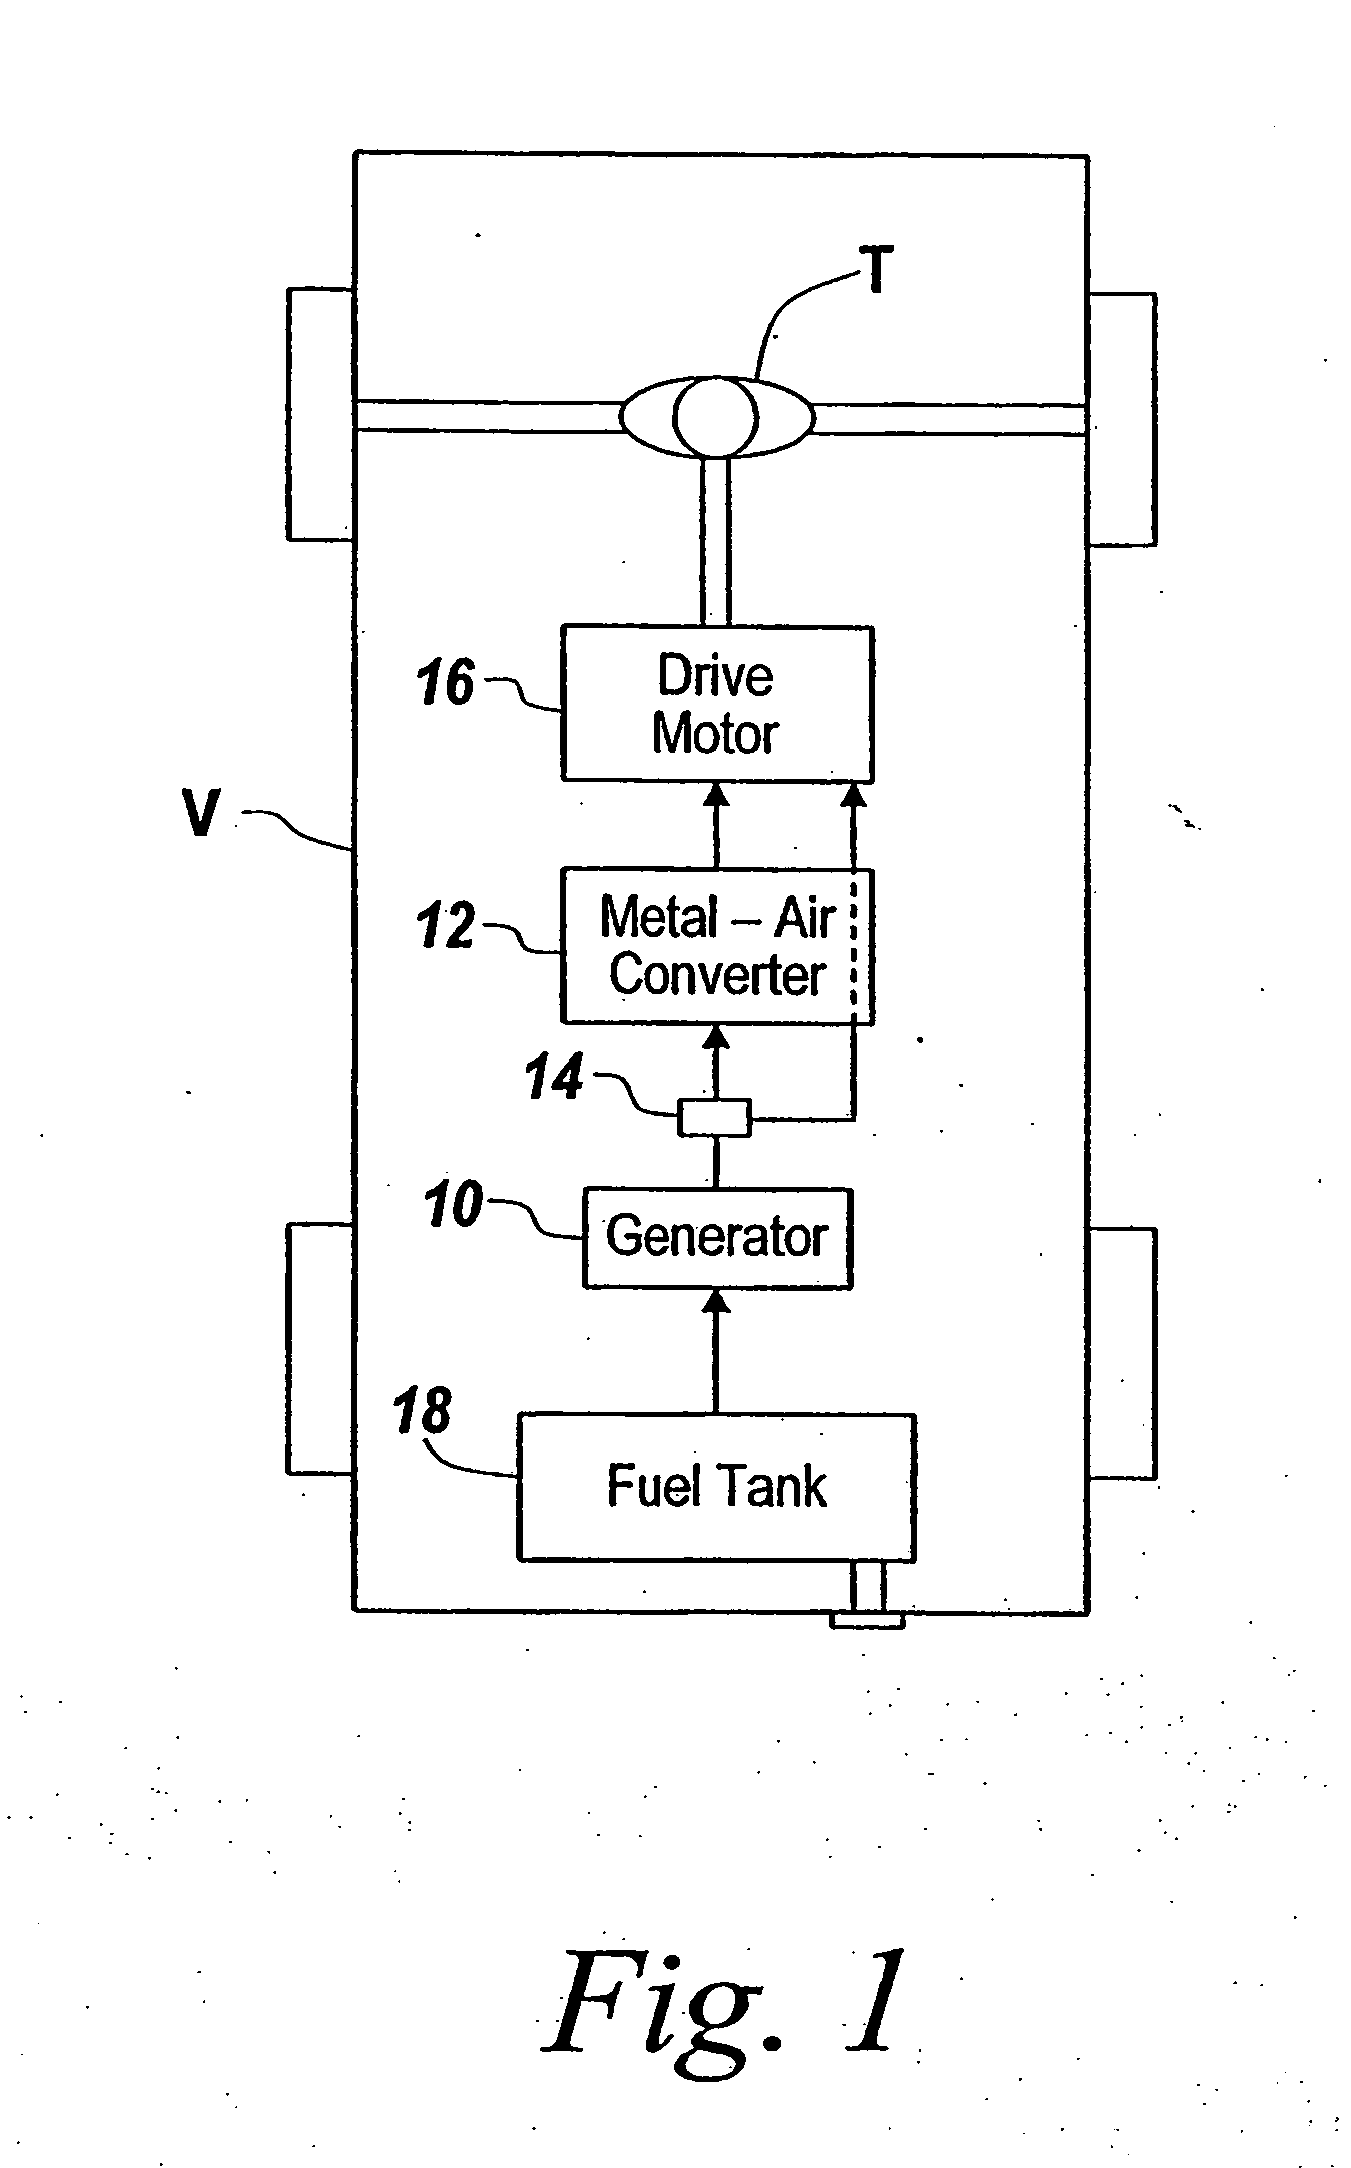 System and method for recharging a metal-air converter used for vehicle propulsion